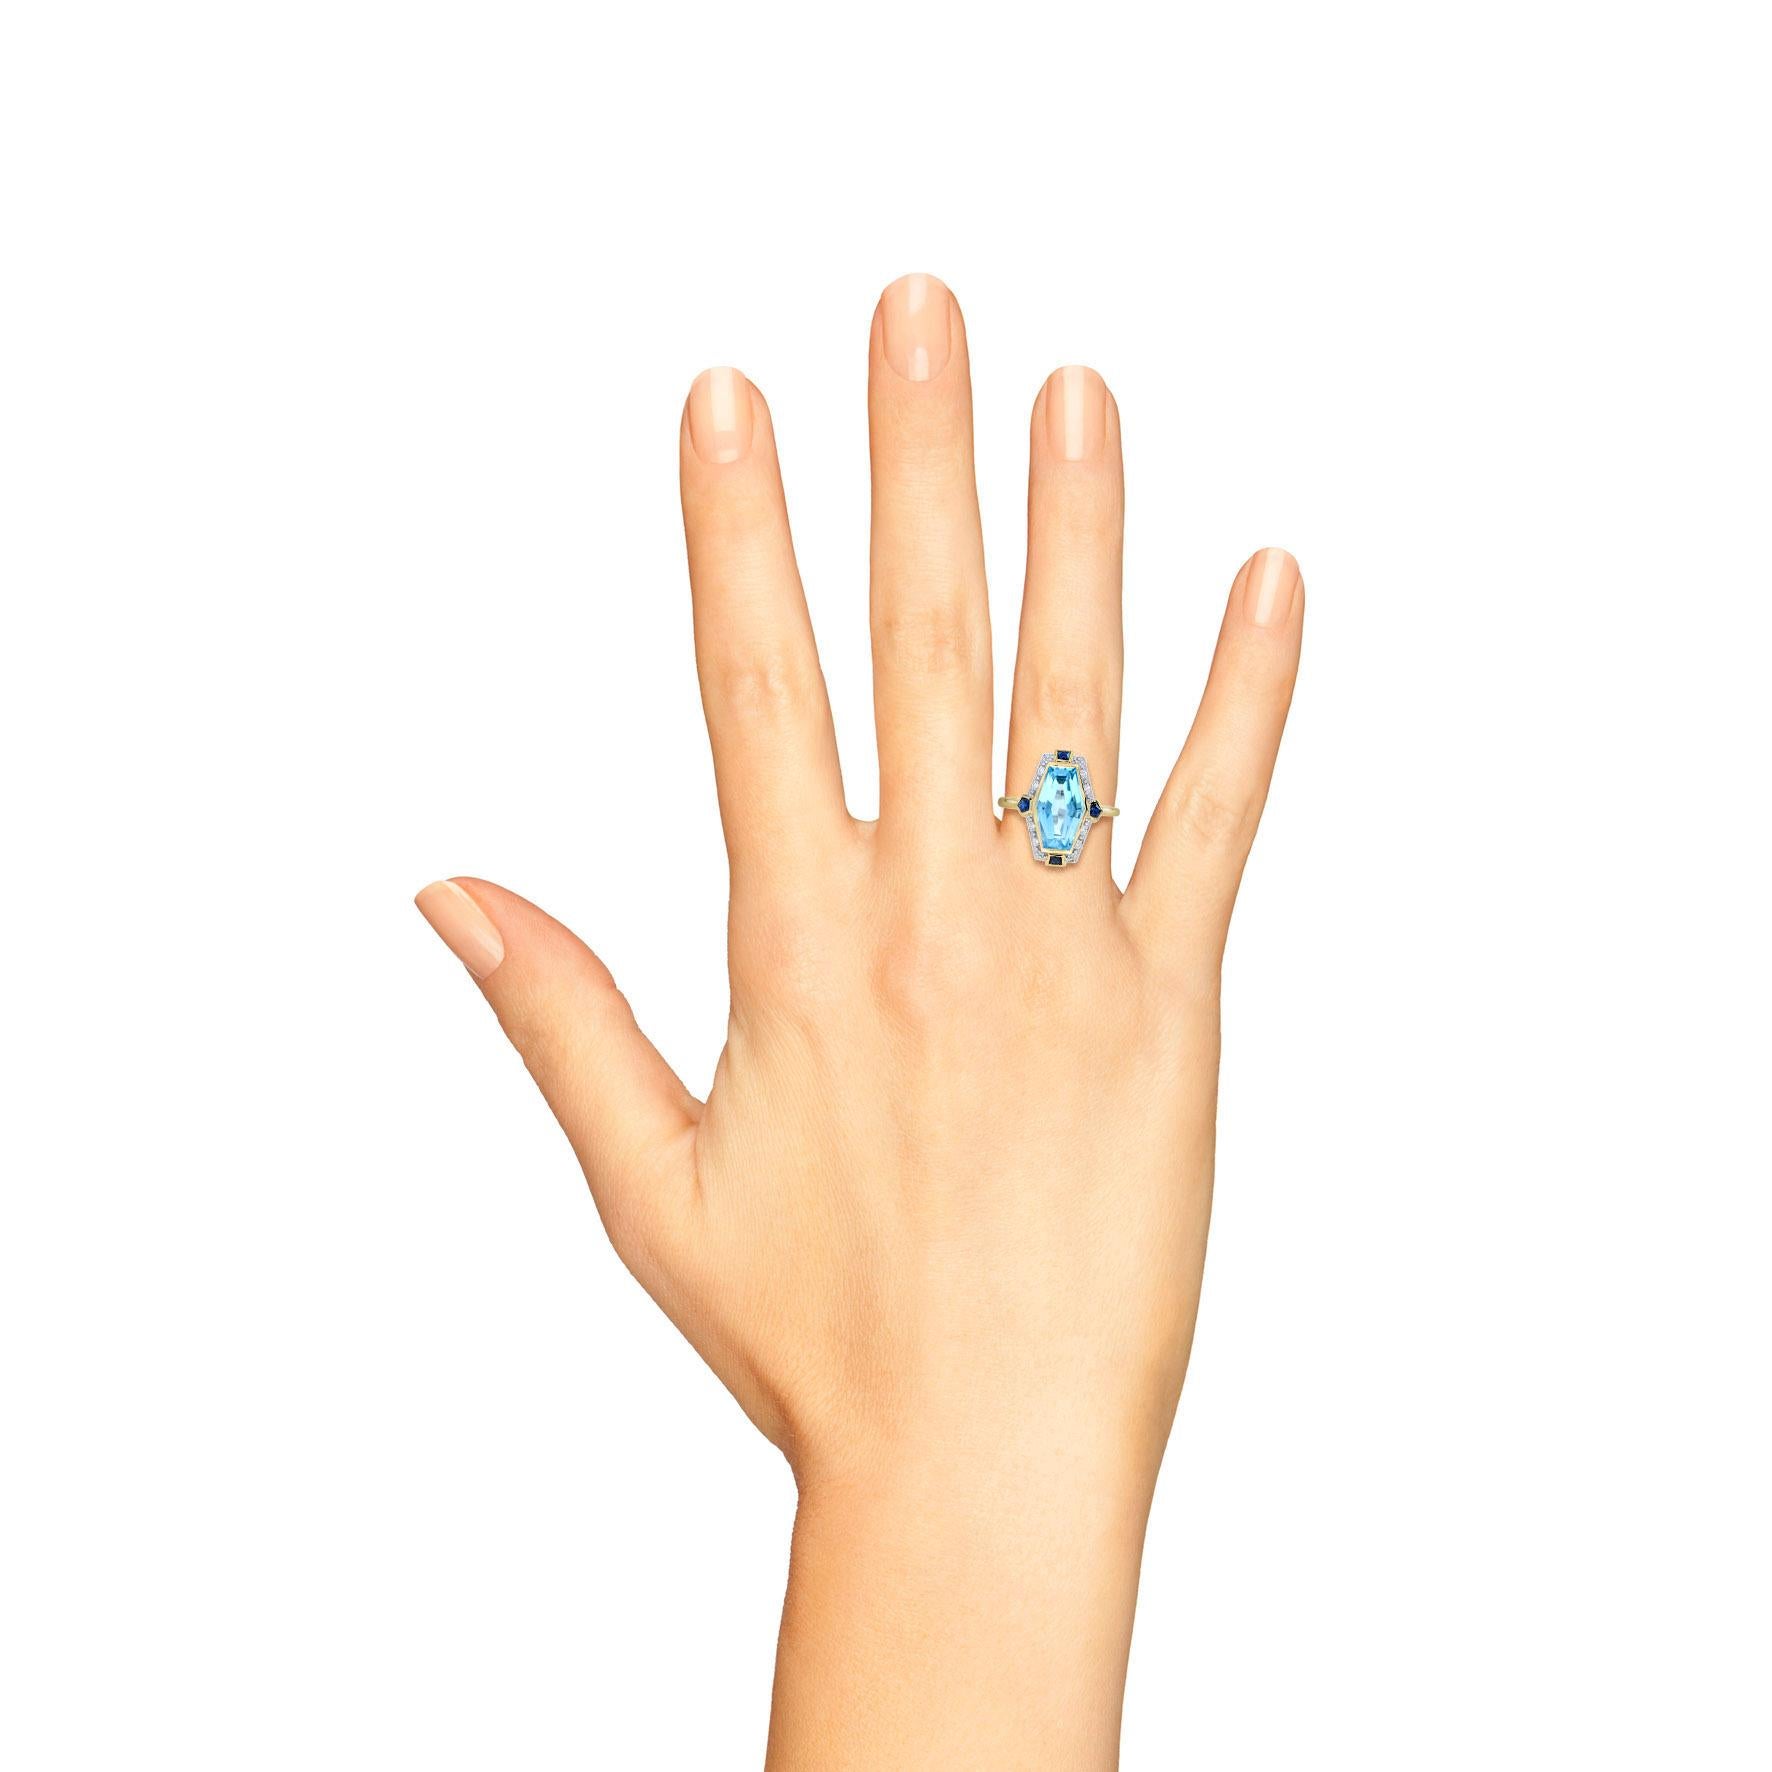 This charming ring features a 4.13 carat elongated hexagon shaped sky blue topaz, set in bezel setting, with French cut sapphire and diamond halo. The diamond halo mirrors the shape of the center stone giving a super cool touch. Wear this ring as a